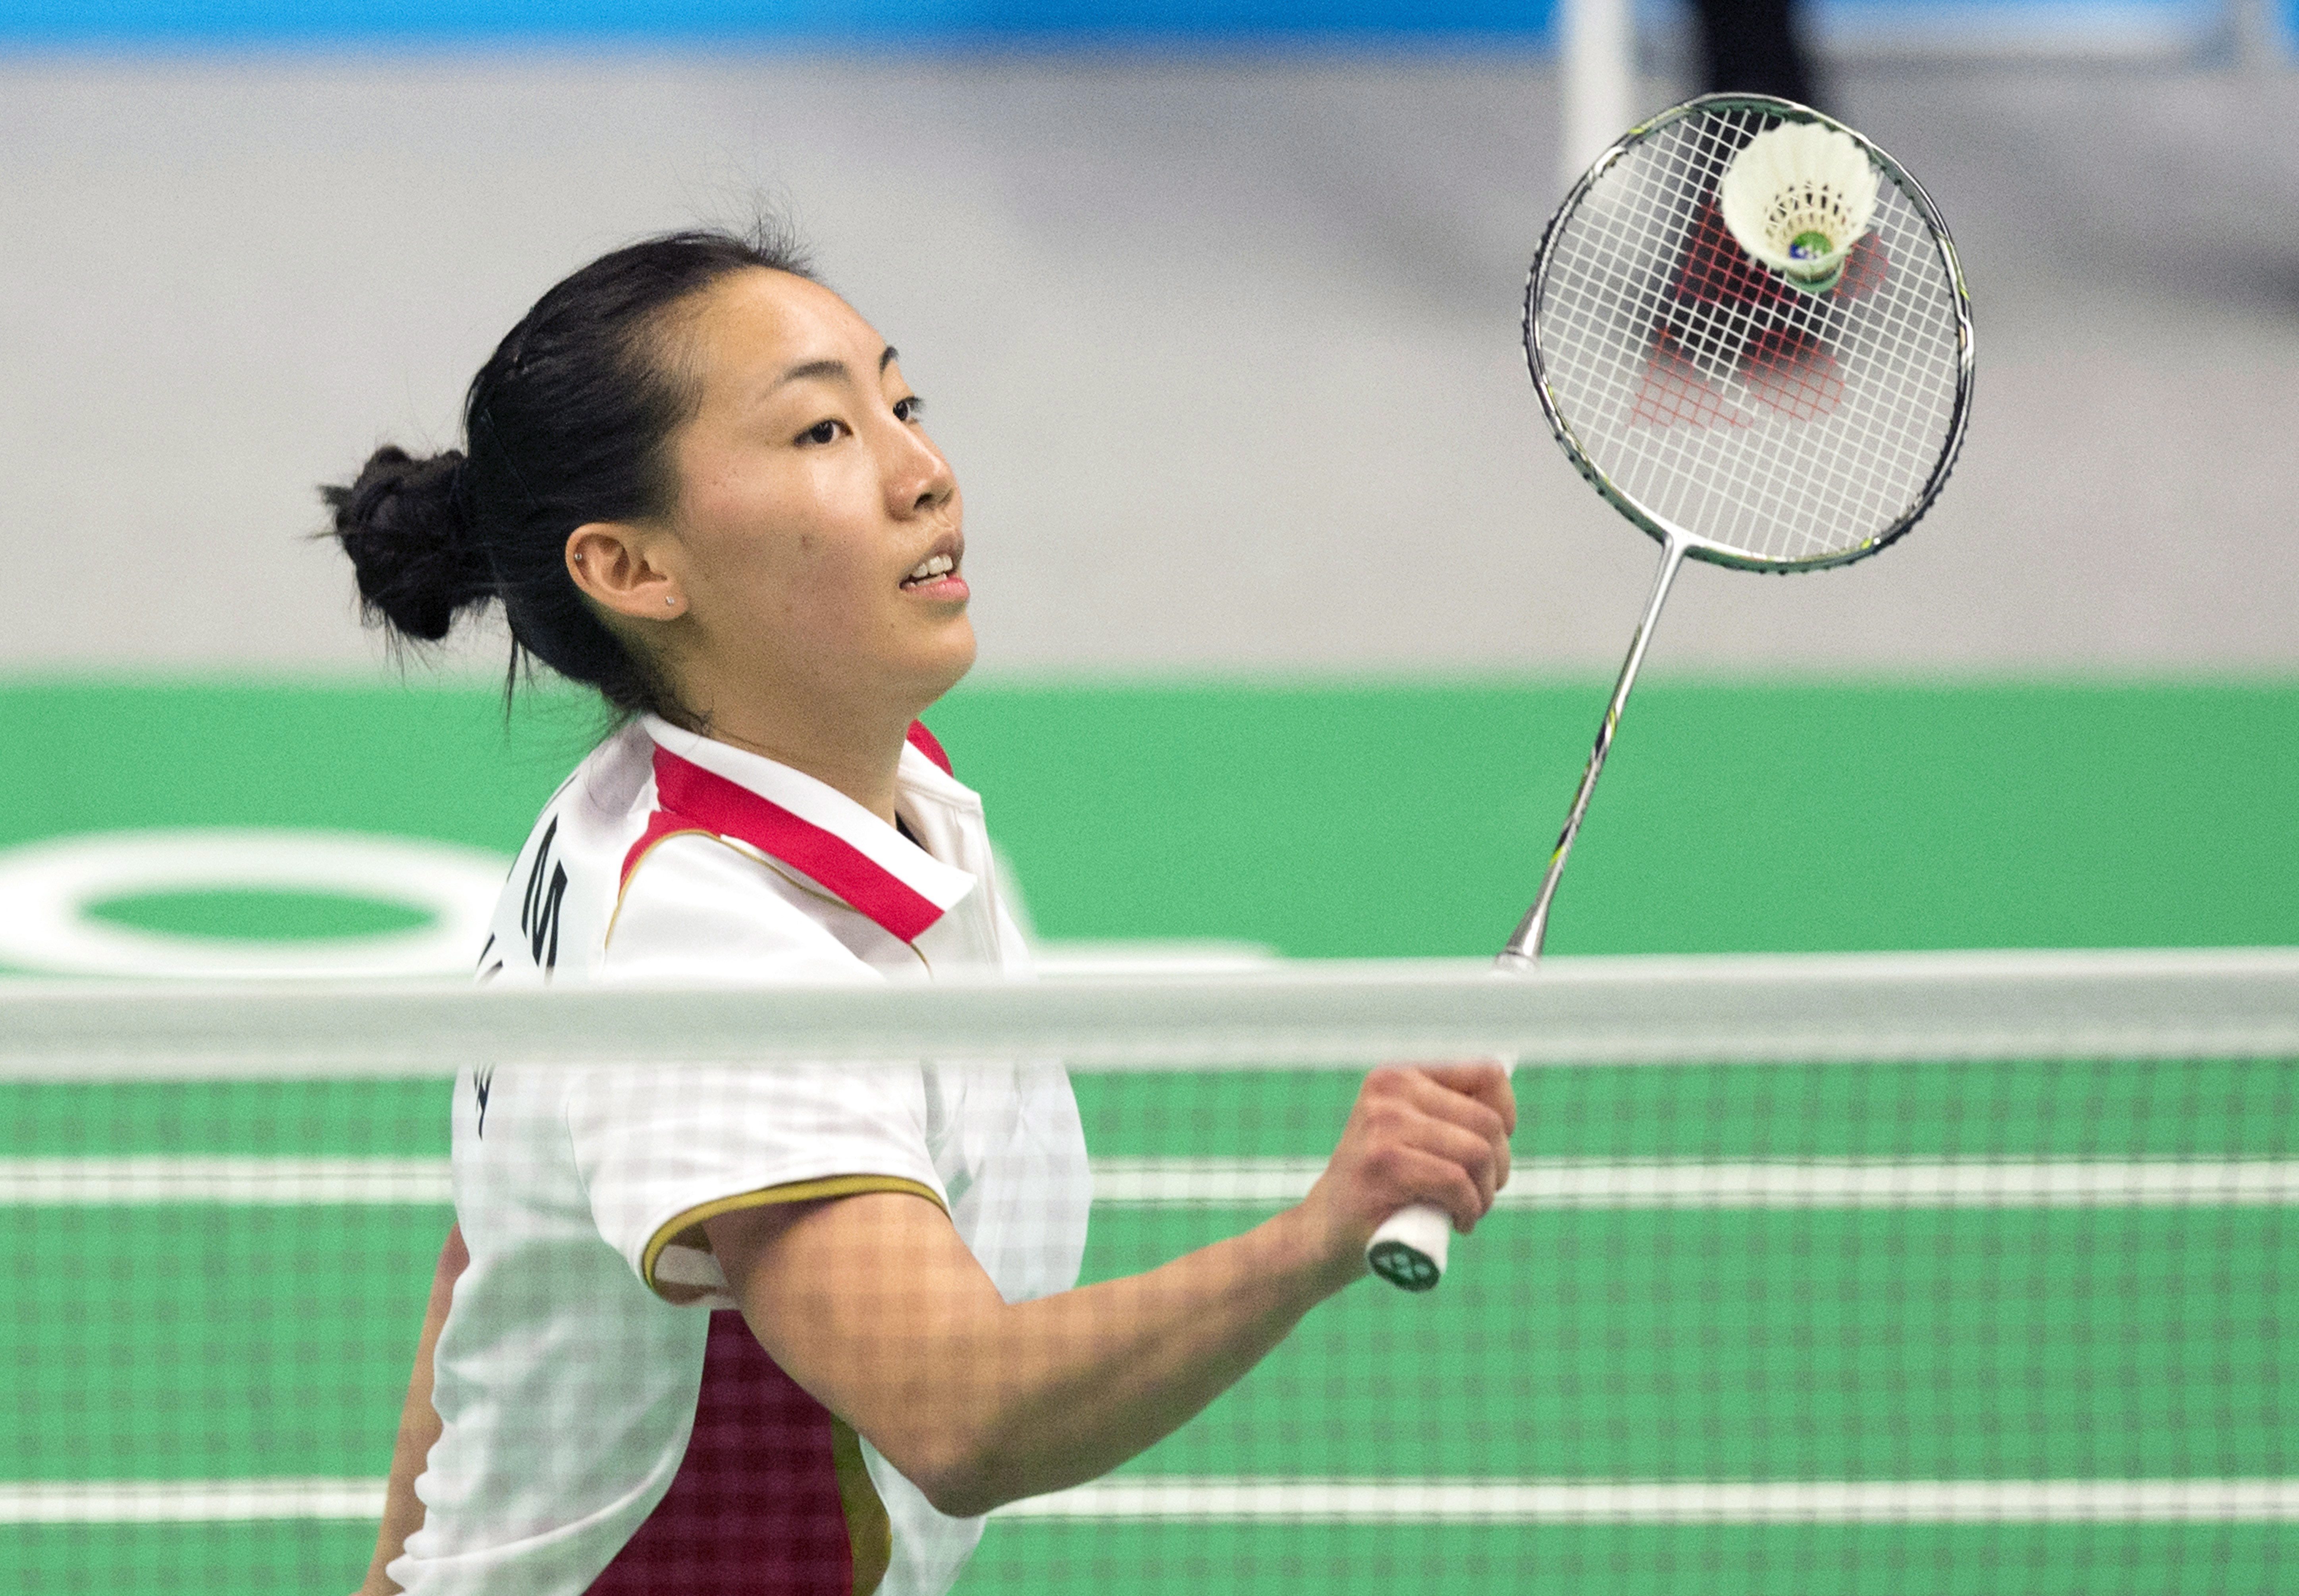 Michelle Li of Canada hits a return during women's singles badminton action against Rachel Honderich of Canada at the 2015 Pan Am Games in Markham, Ont., on Thursday, July 16, 2015. THE CANADIAN PRESS/Darren Calabrese